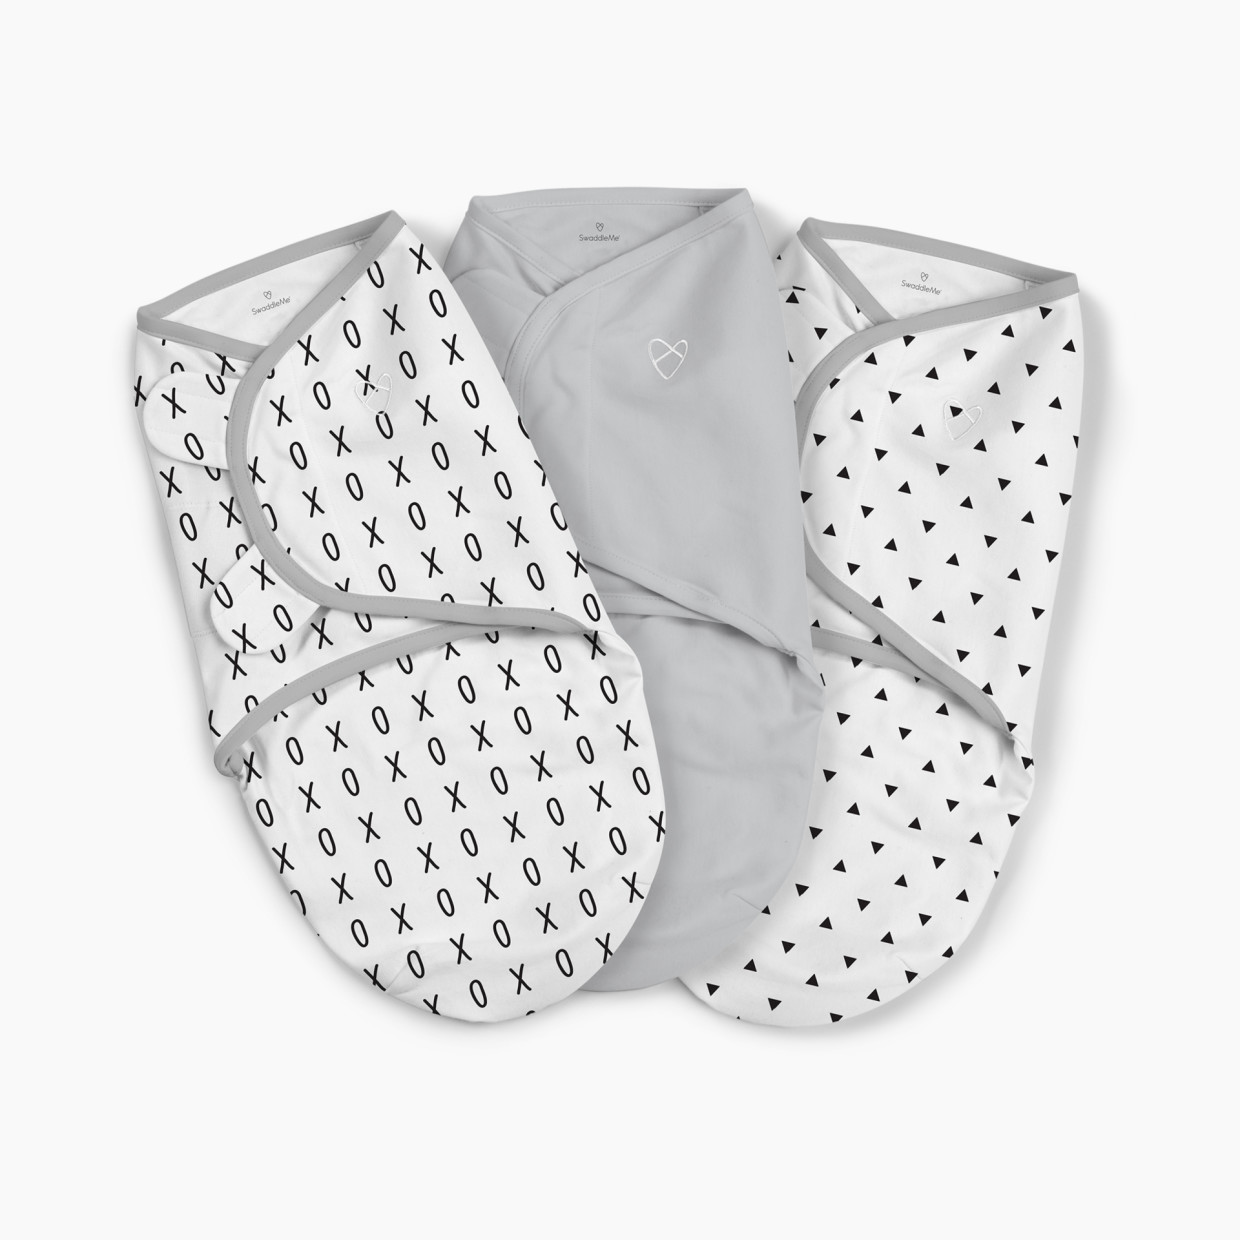 SwaddleMe Original Swaddle Multi Pack - Xo, Small (0-3 Months), 3.